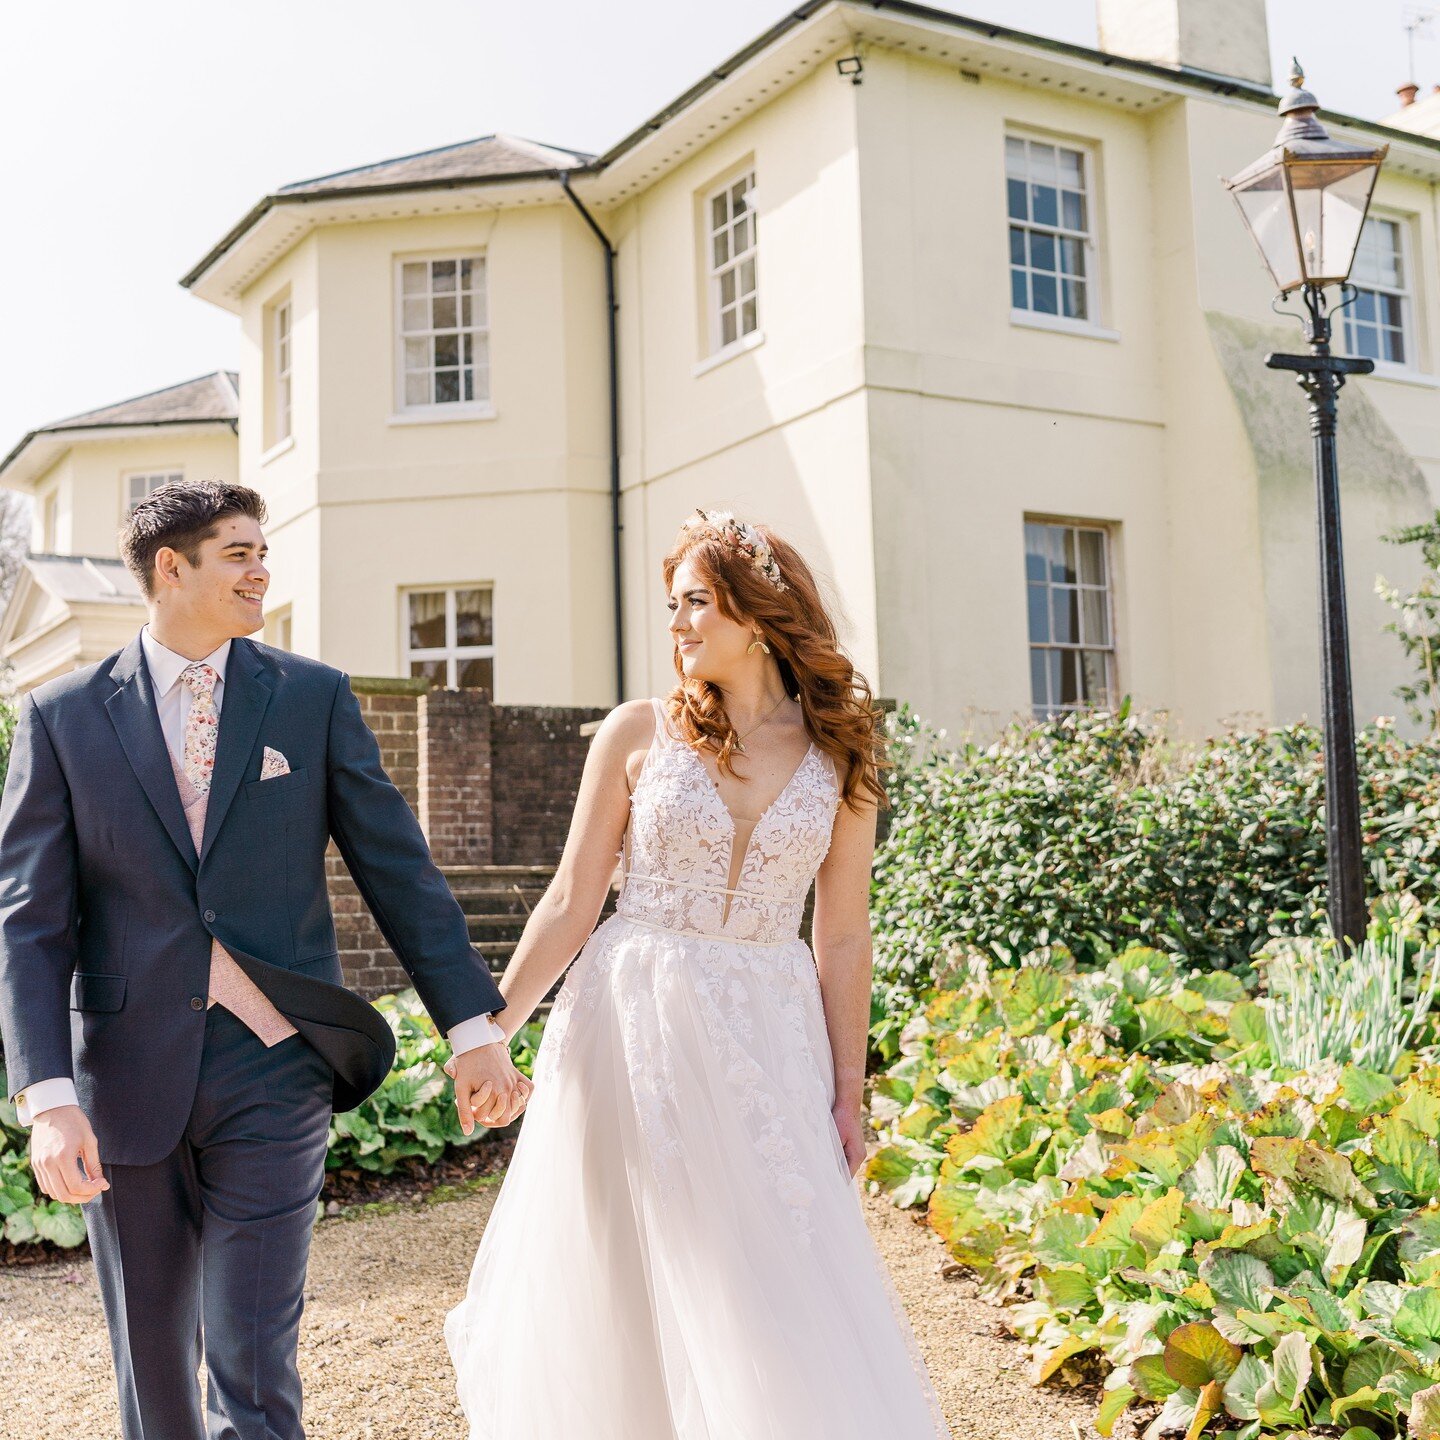 This beautiful styled shoot from back in the spring shows that Toddington Park really is a venue for all seasons. We have endless photo opportunities for your big day. Get in touch to discuss your plans 😍💍

#springwedding #wedding #photoshoot #brid